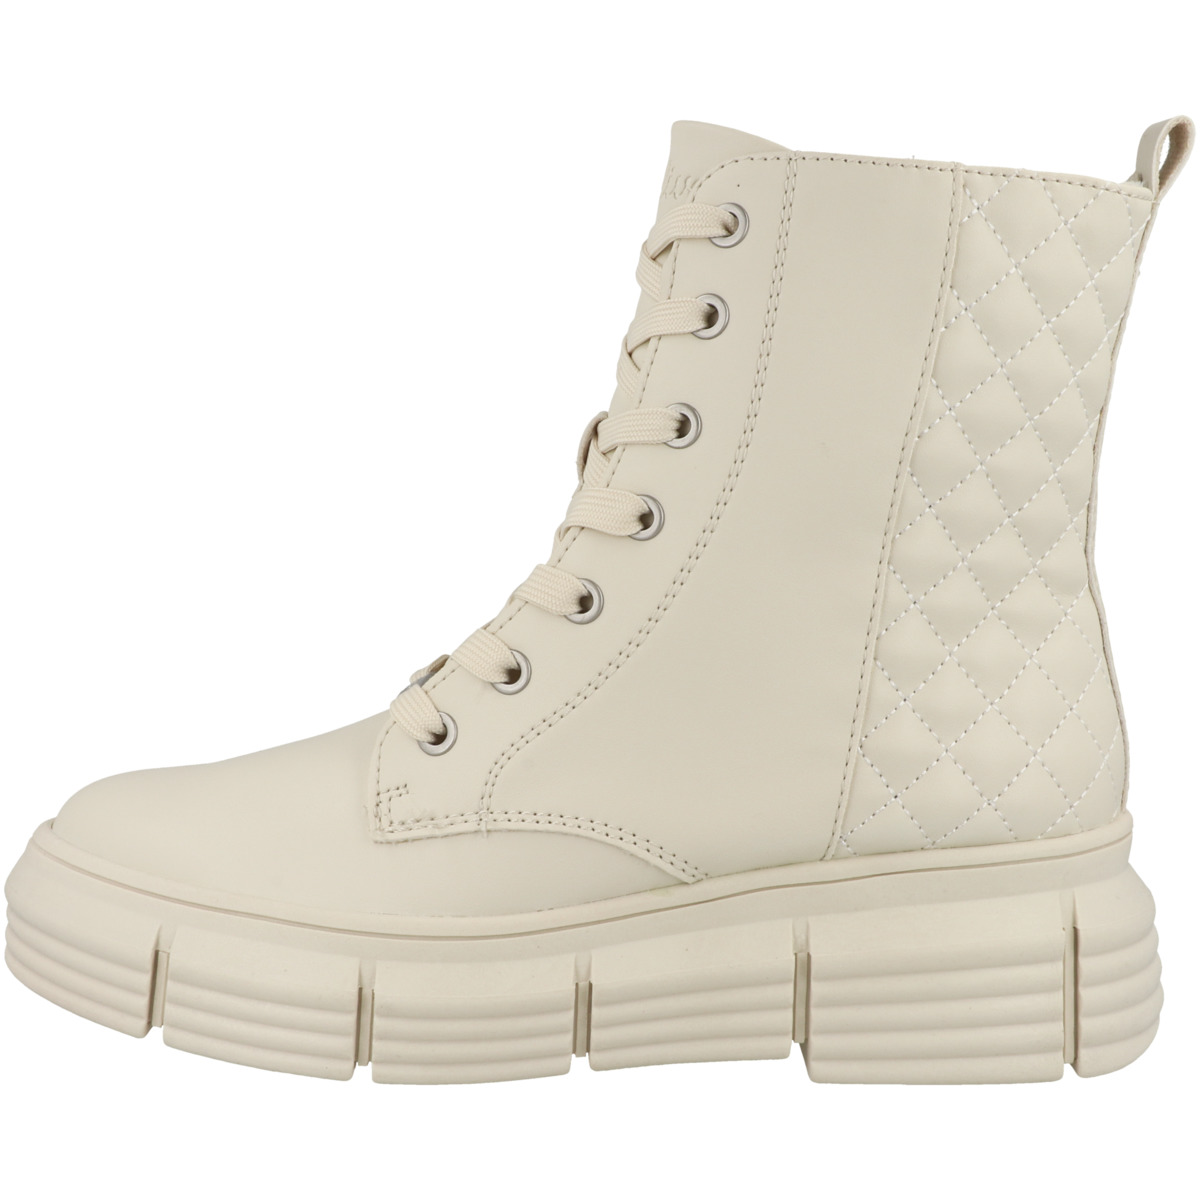 s.Oliver 5-25202-39 Boots creme